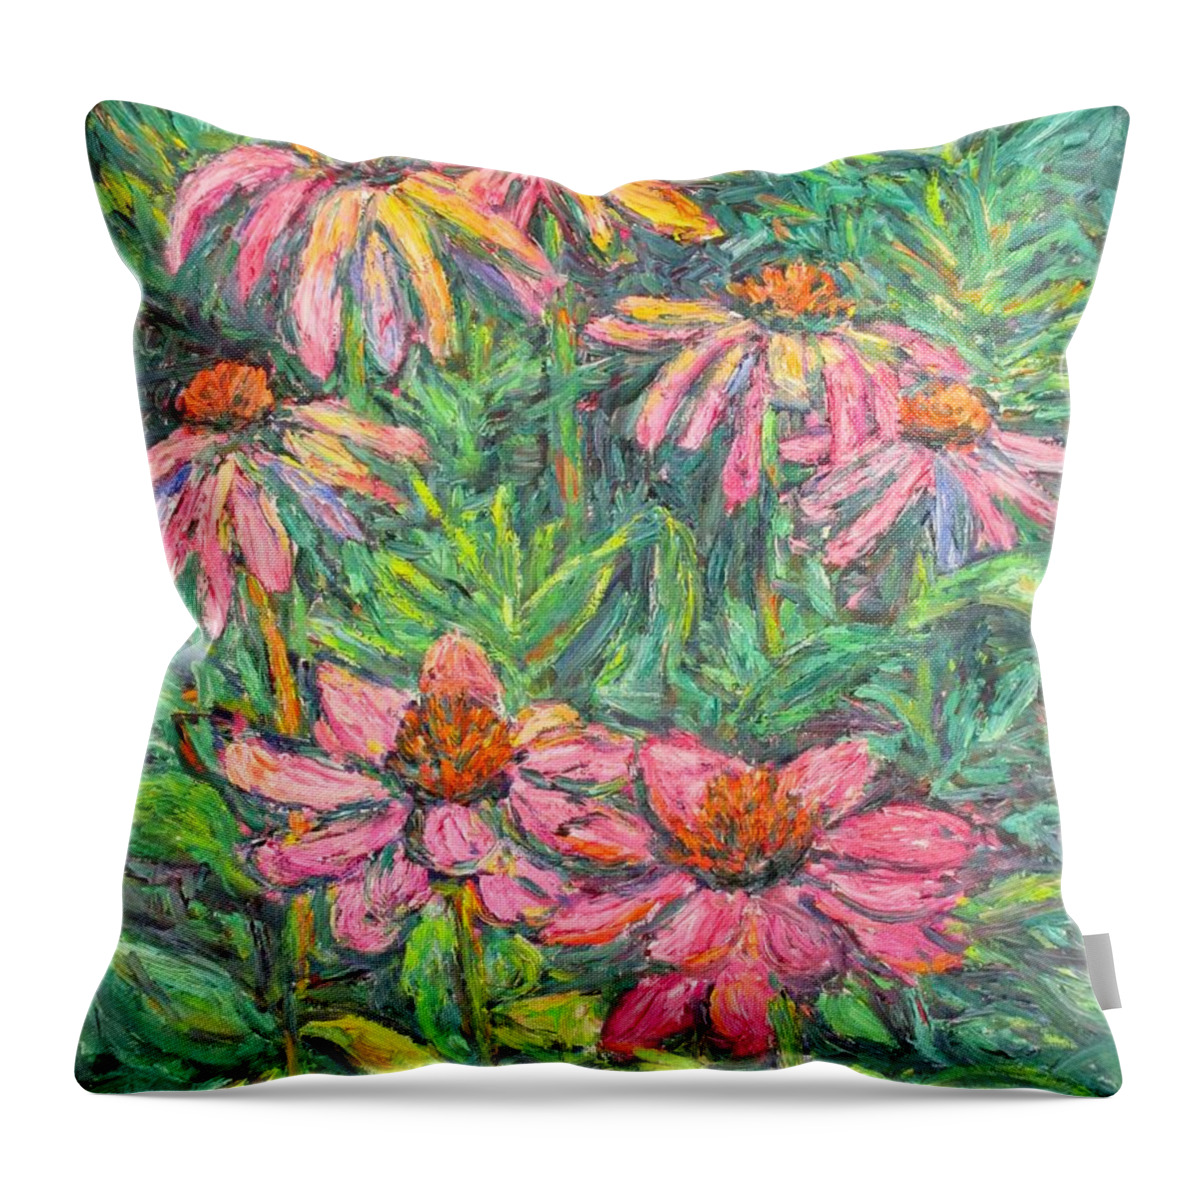 Coneflowers Throw Pillow featuring the painting Circle of Coneflowers by Kendall Kessler